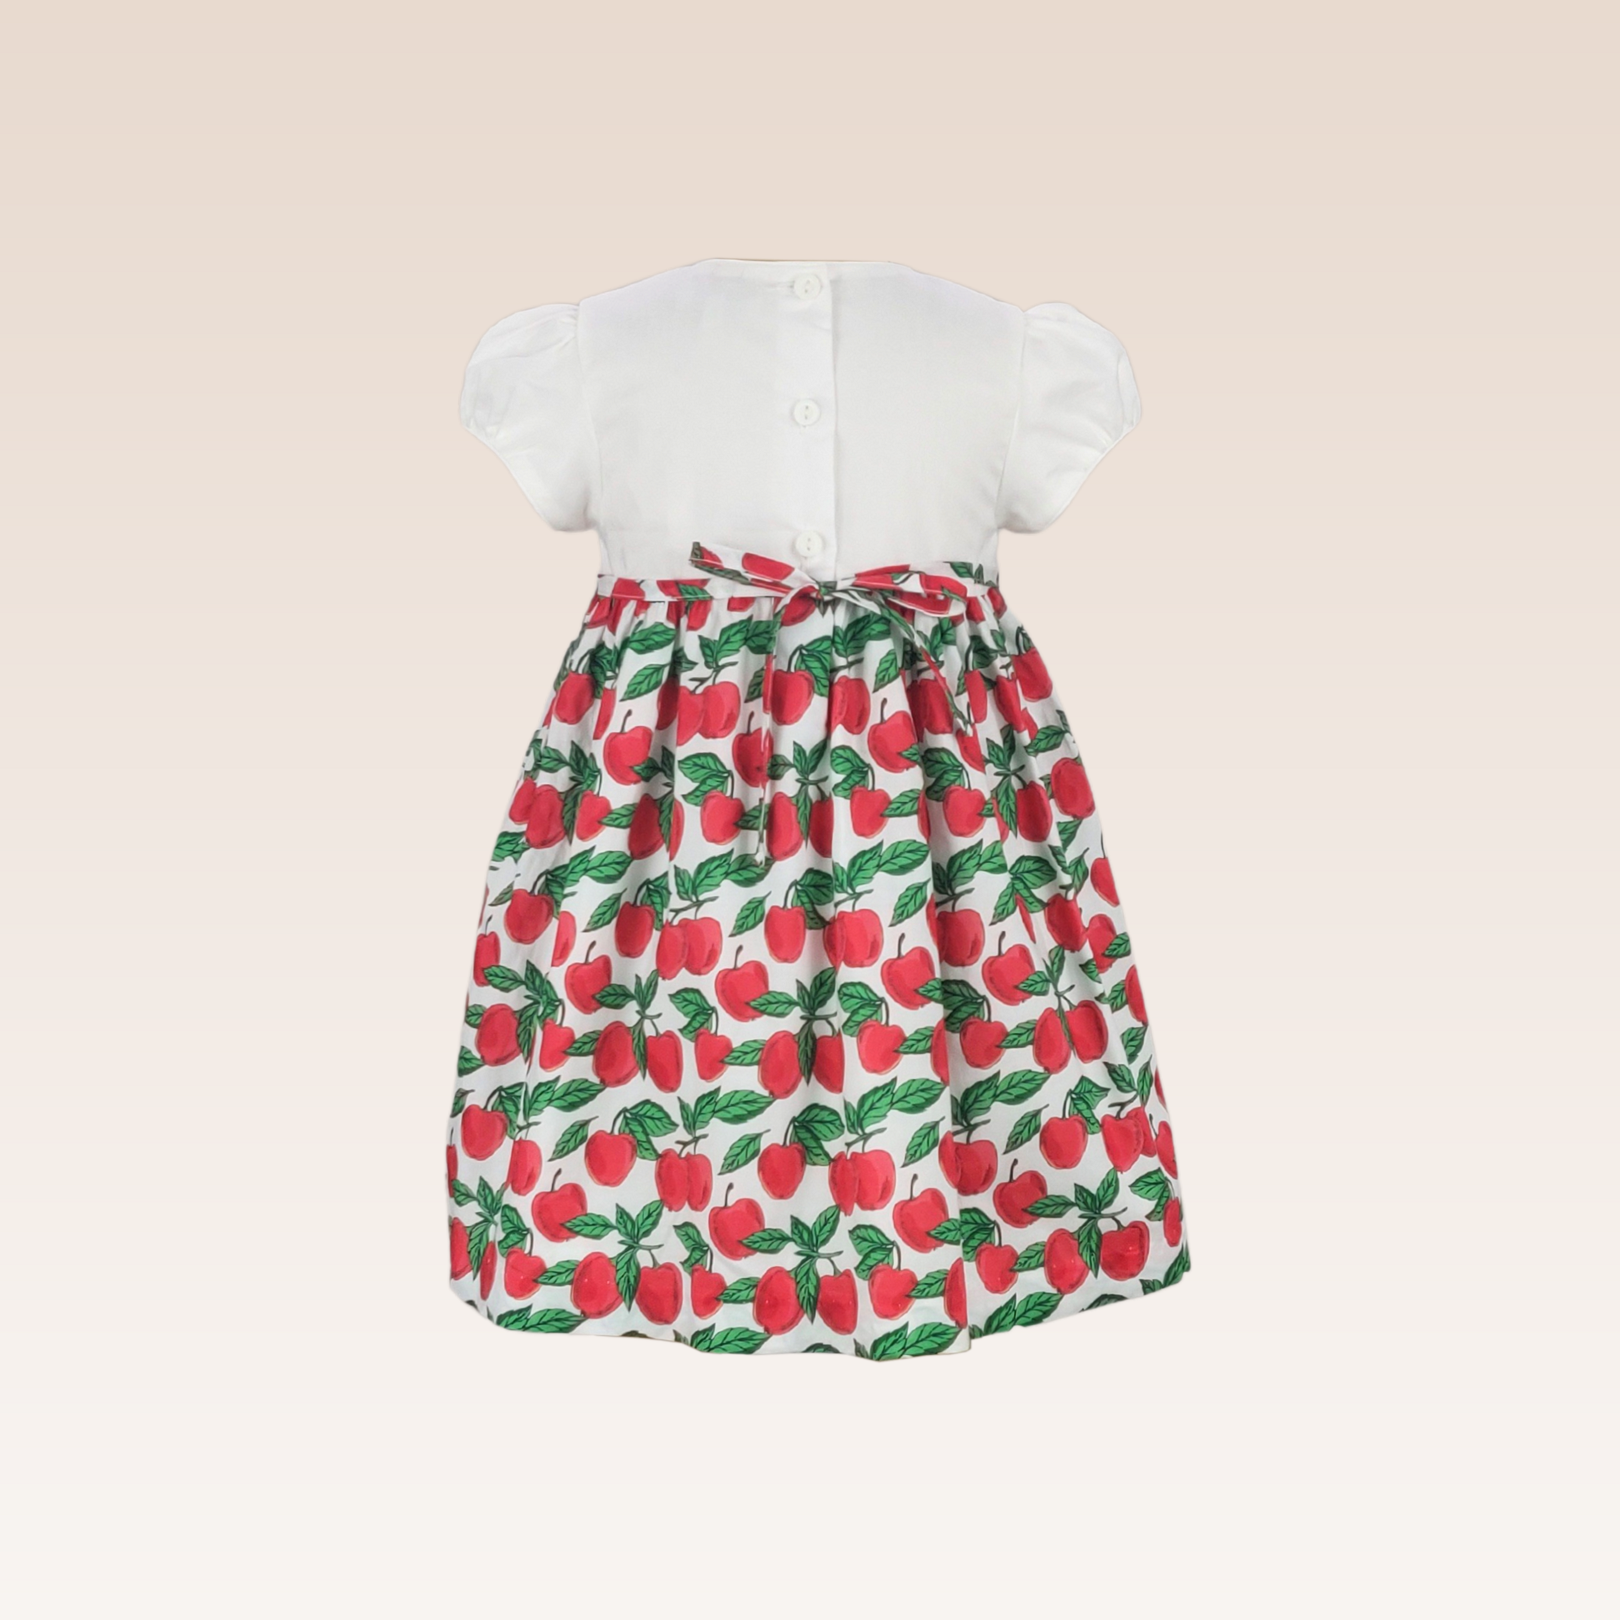 Lany Baby Girls Printed Fruit Smocked Front with Bows and Diaper Cover